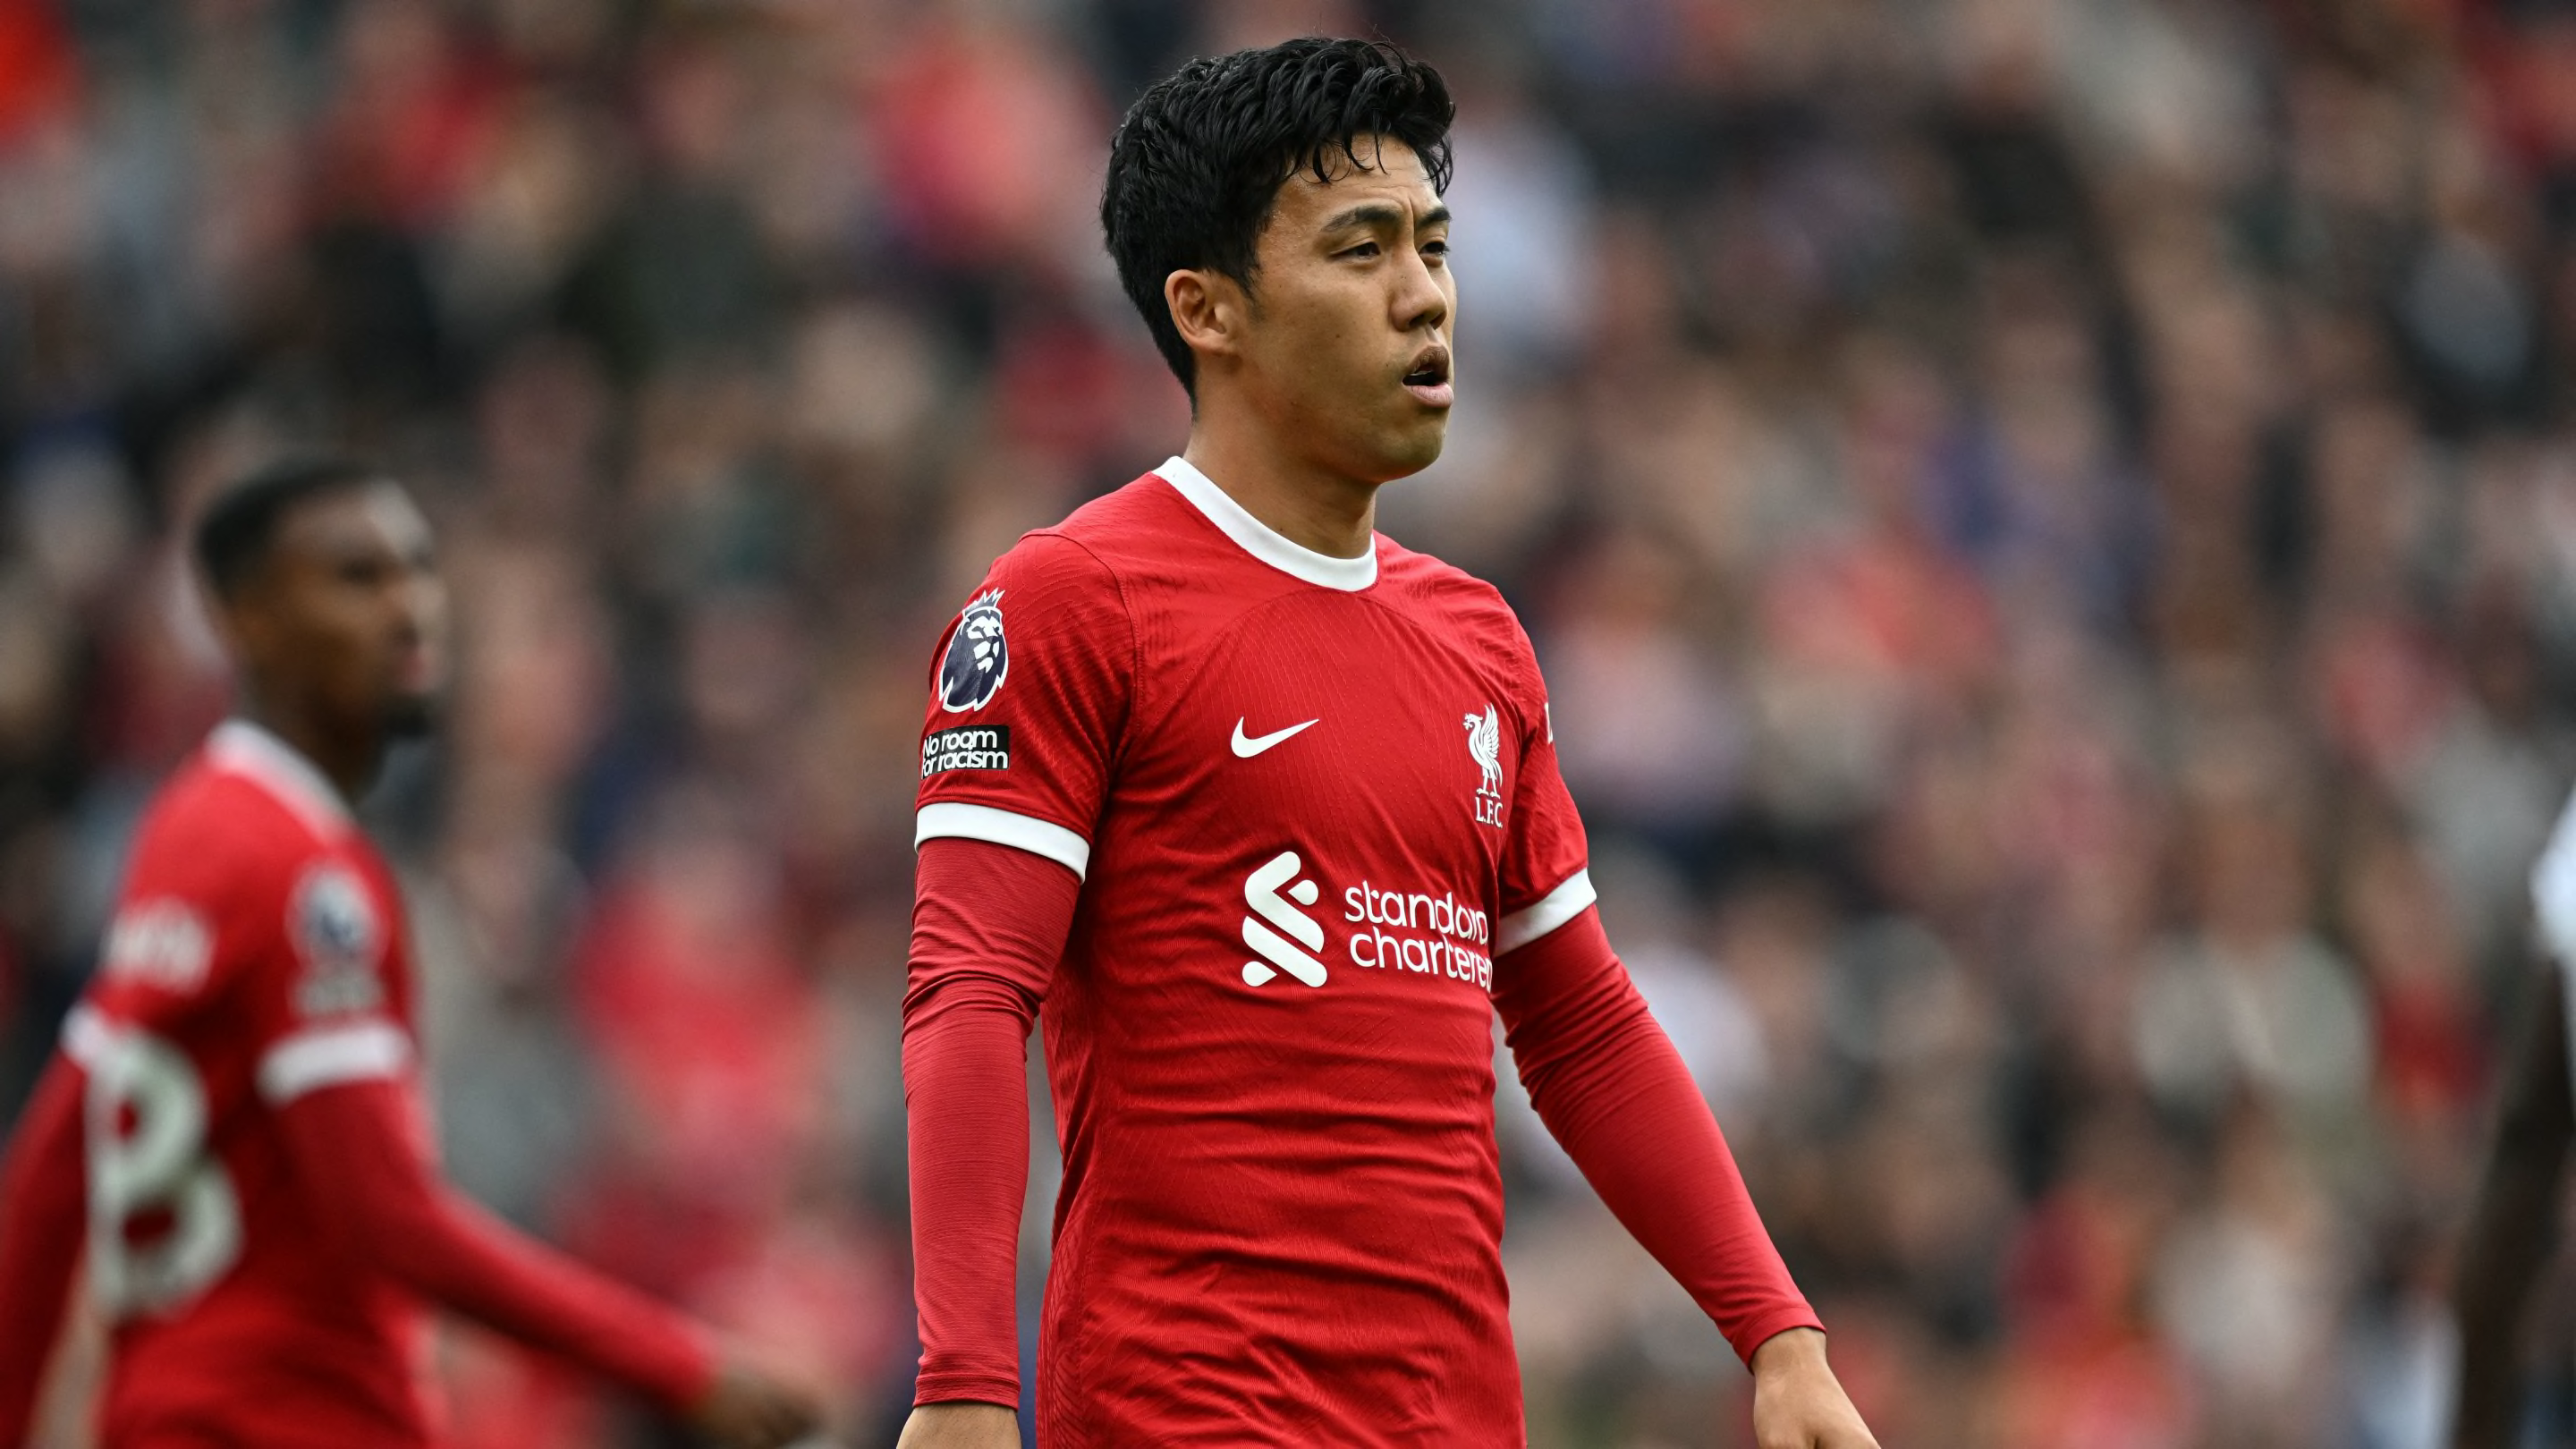 Wataru Endo names Liverpool player who has impressed him since joining the club